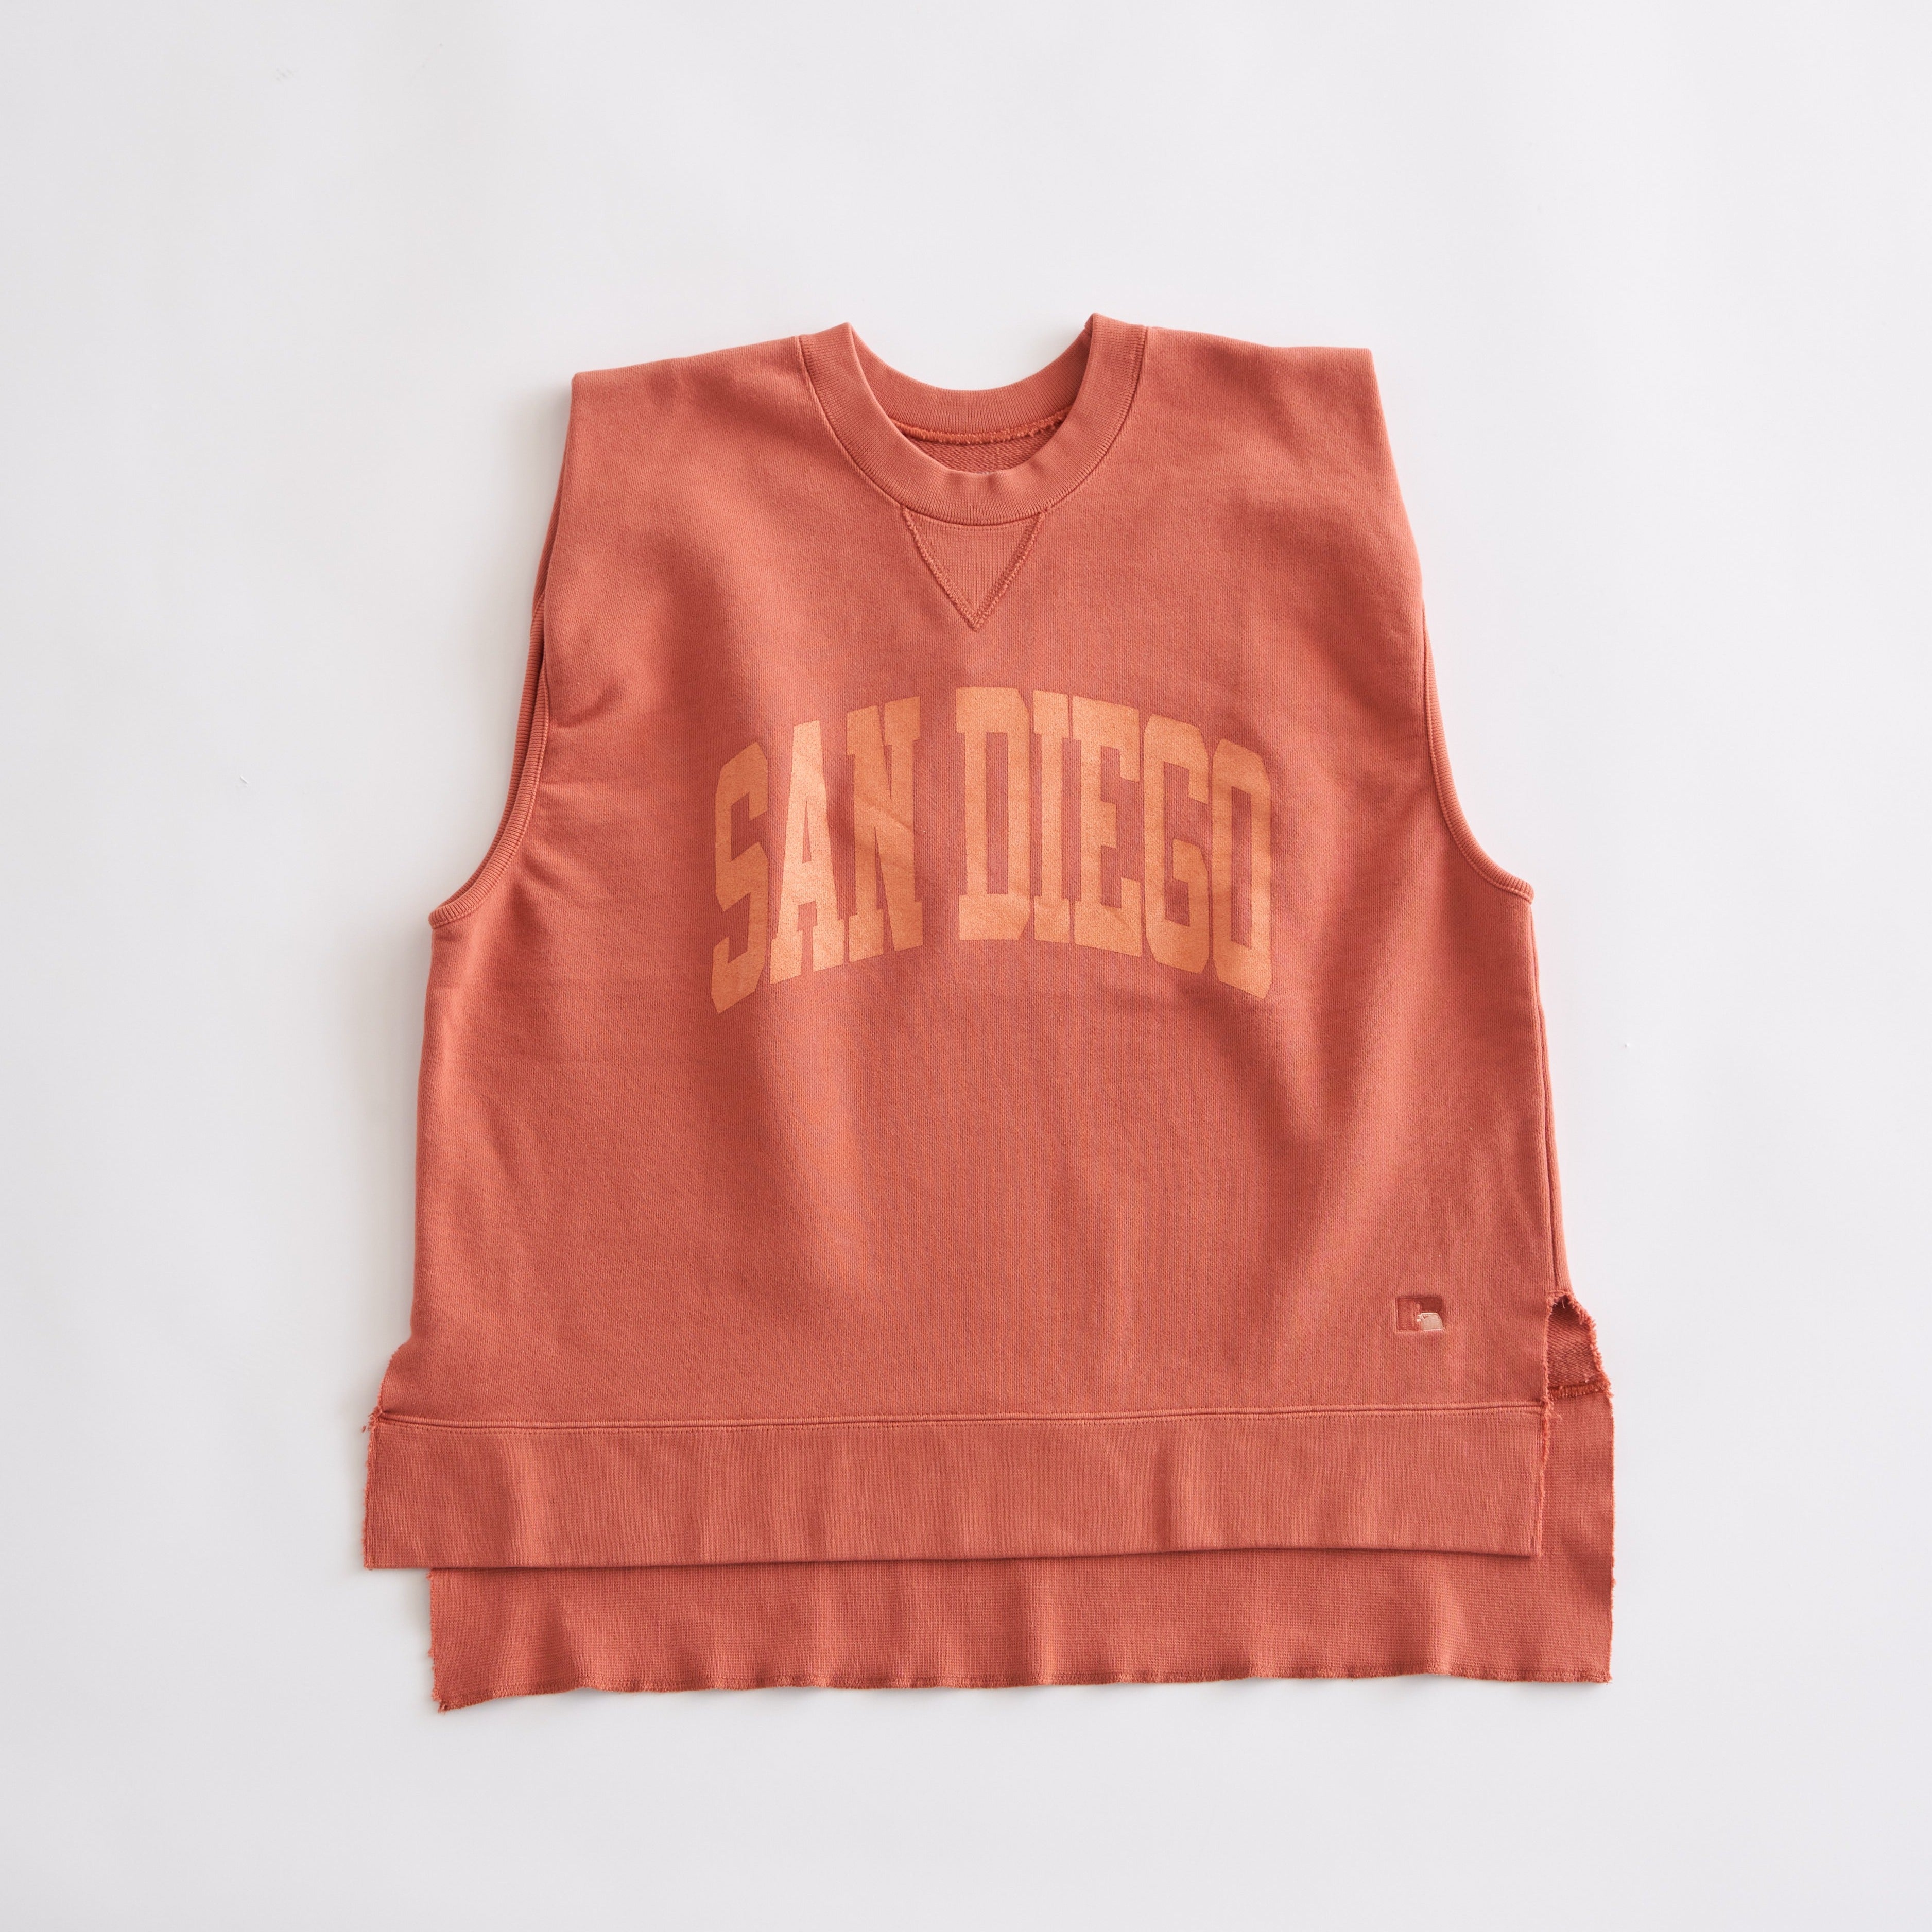 RUSSELL ATHLETIC / Sweet Womns Sleeveless Shirt